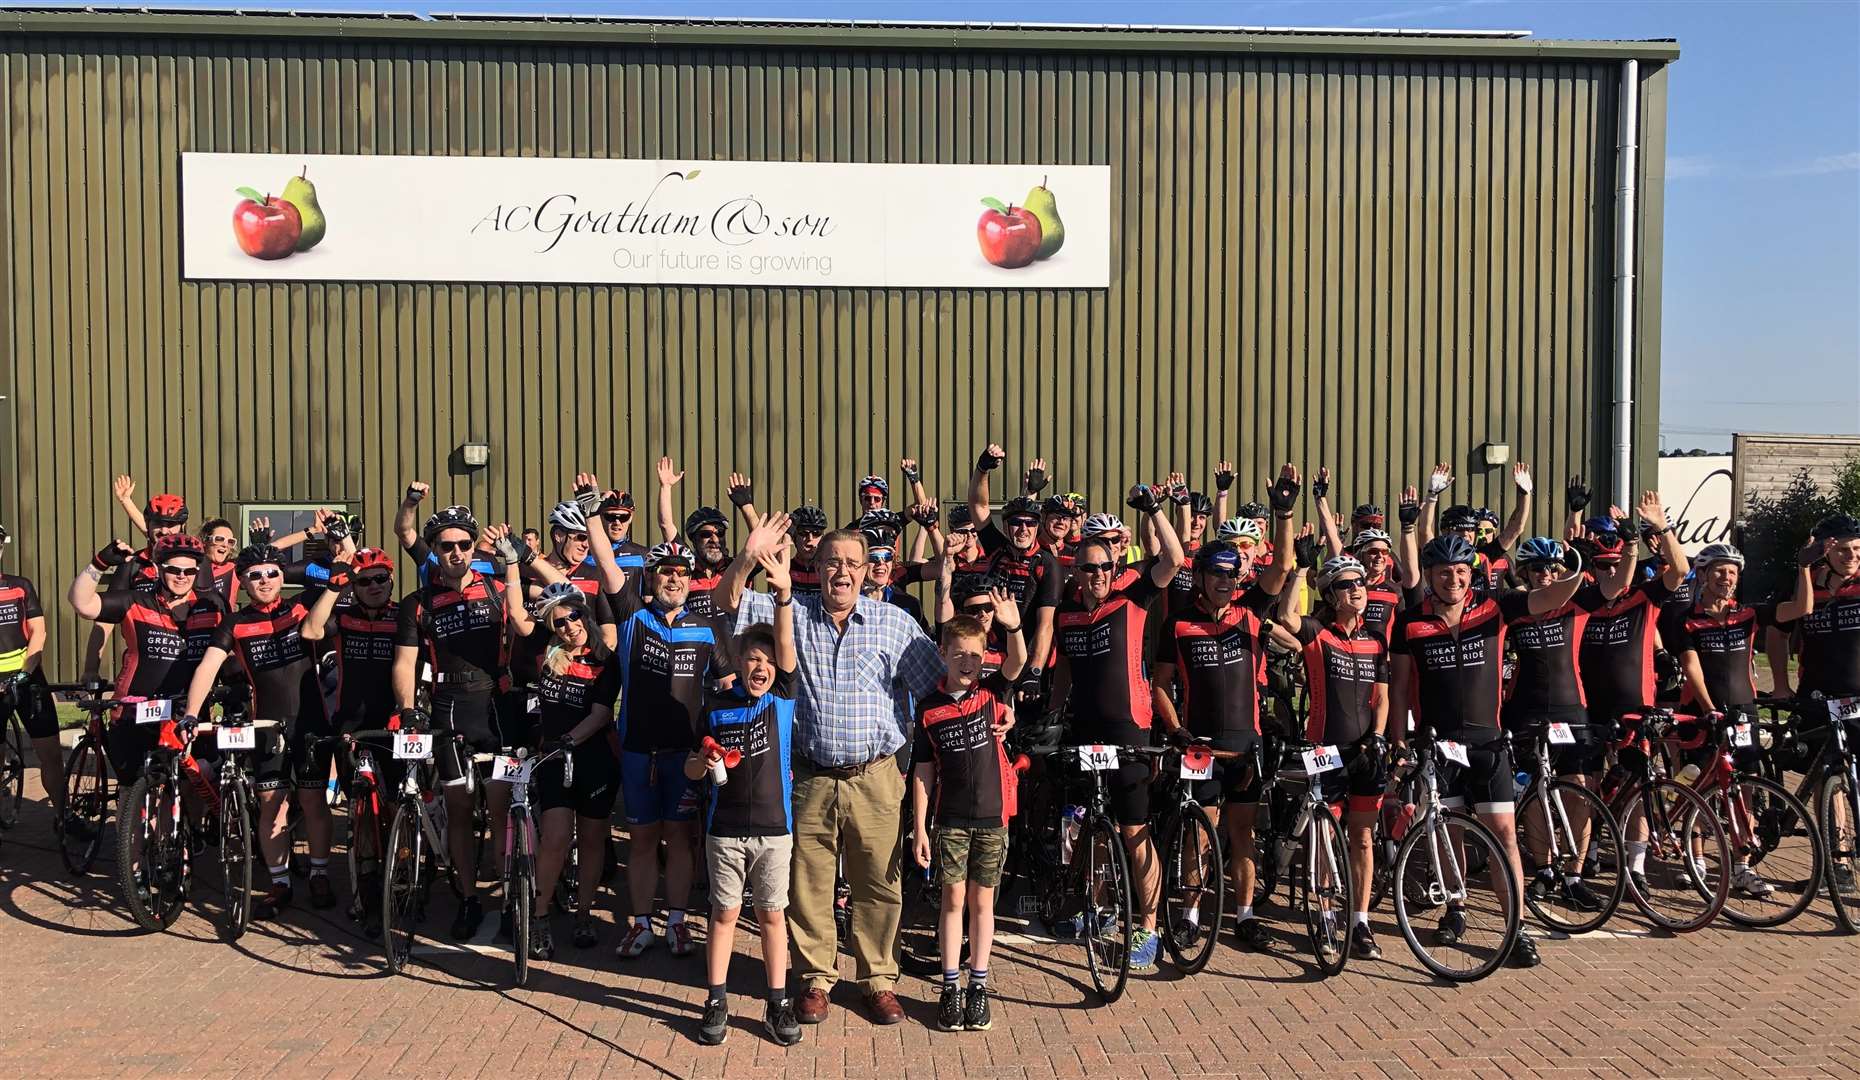 AC Goatham will be supporting two brilliant cycle rides in 2020 in a bid to get more people fitter and healthier.